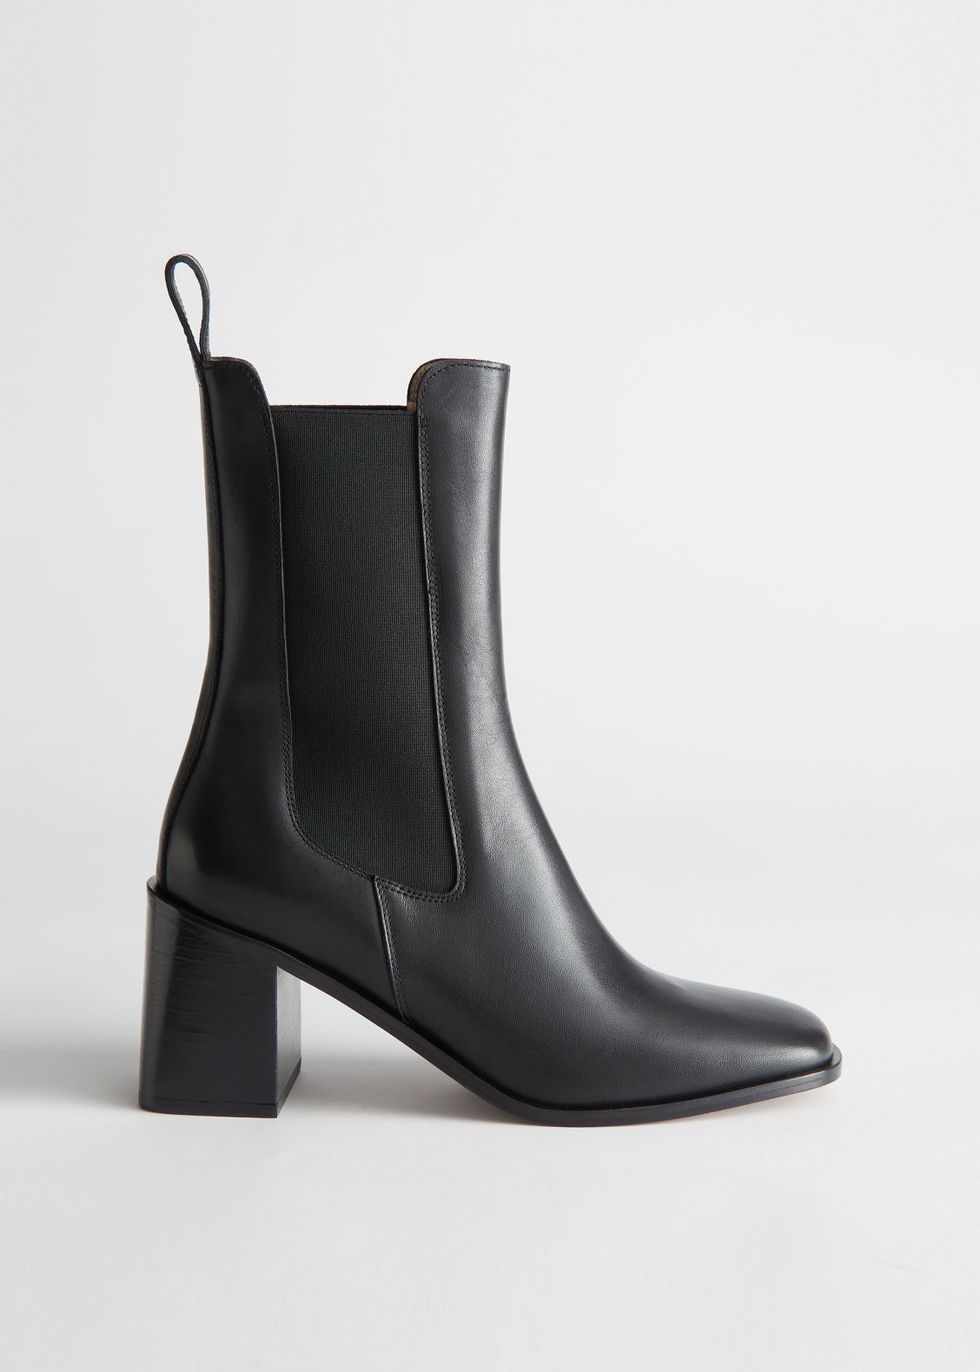 Best High Heeled Ankle Boots To Buy Now